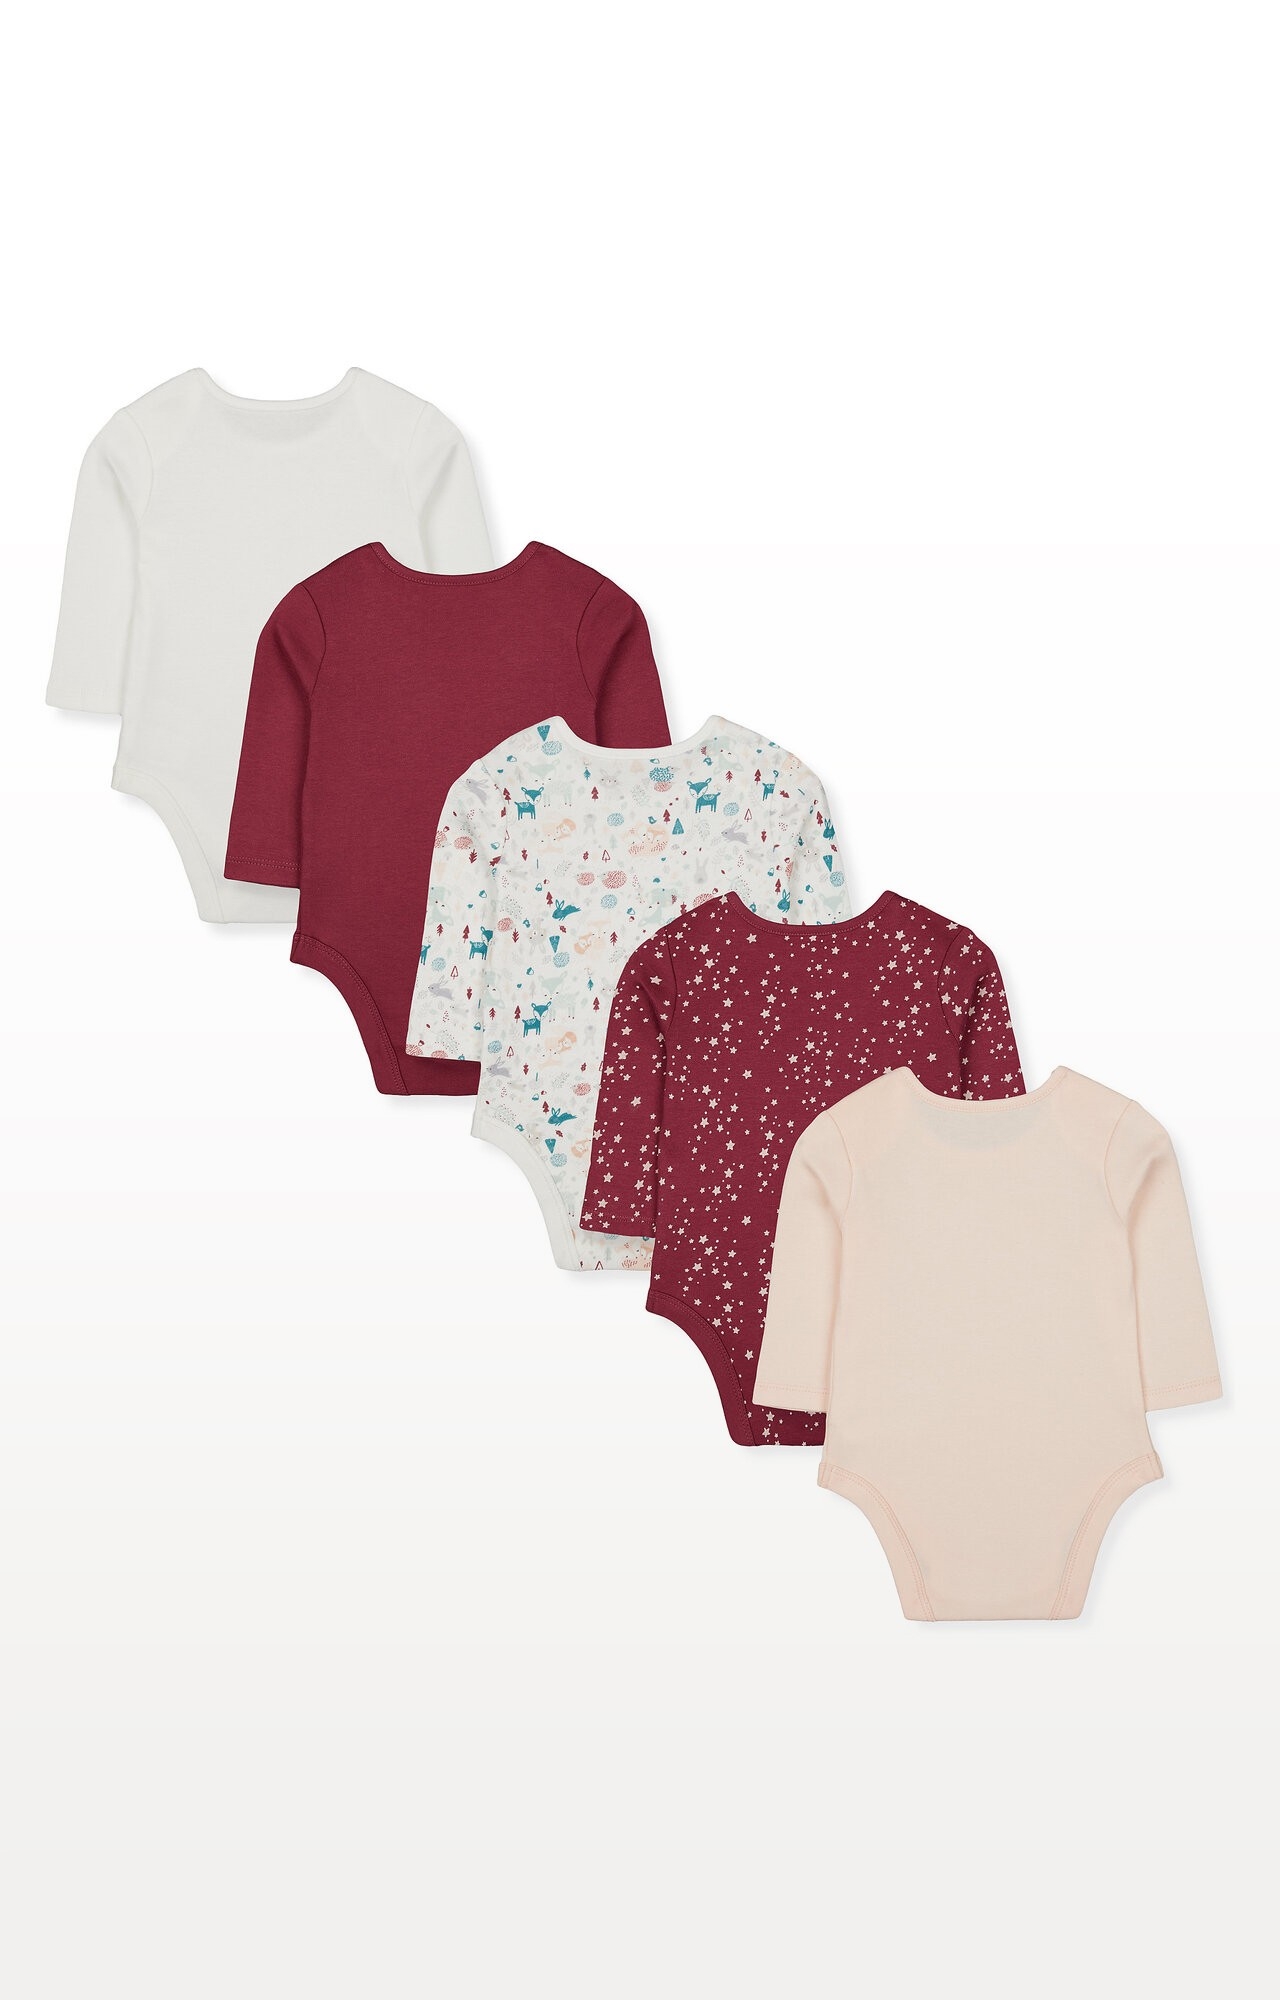 Mothercare | Winter Woodland Bodysuits - Pack of 5 1